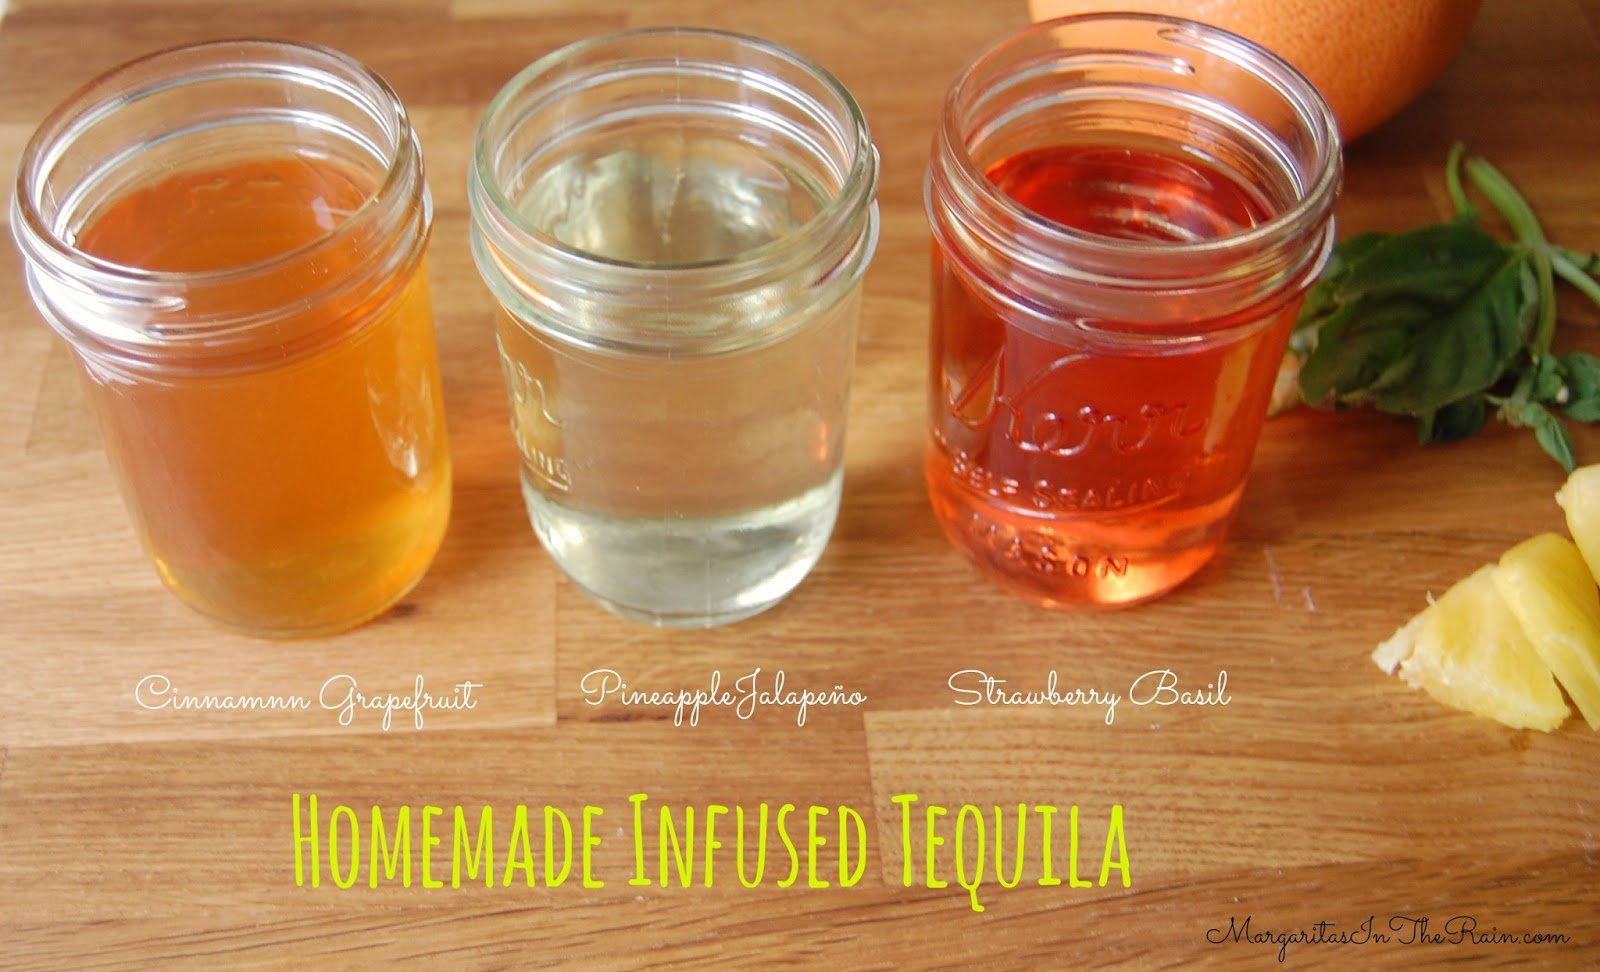 Margaritas In The Rain: Homemade Infused Tequila